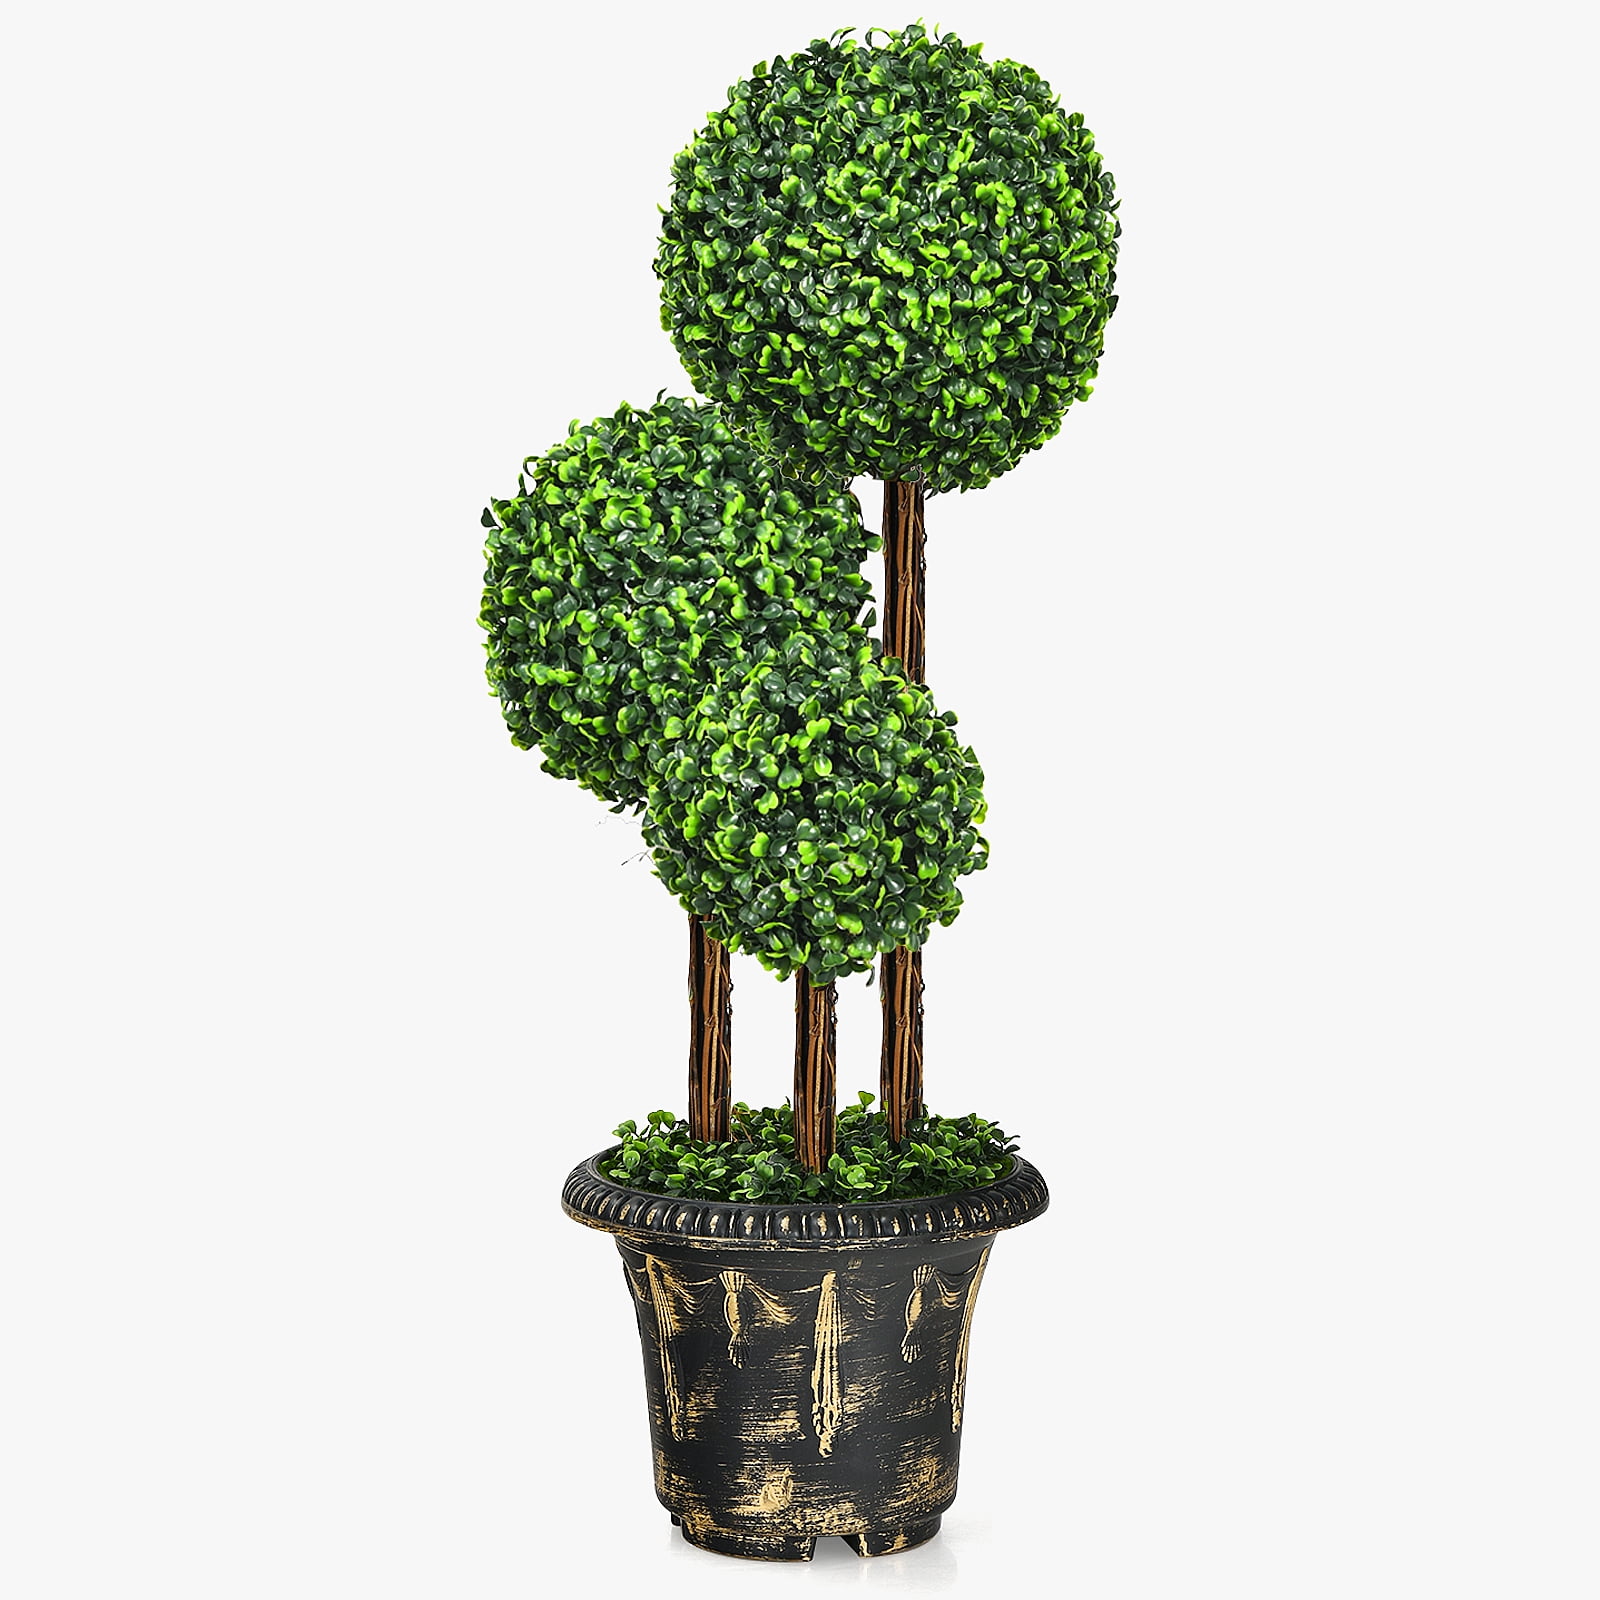 3rd Street Inn Baby's Breath Topiary Ball - 19 inch Artificial Topiary Plant - Wedding Decor - Indoor/Outdoor Artificial Plant Ball - Topiary Tree